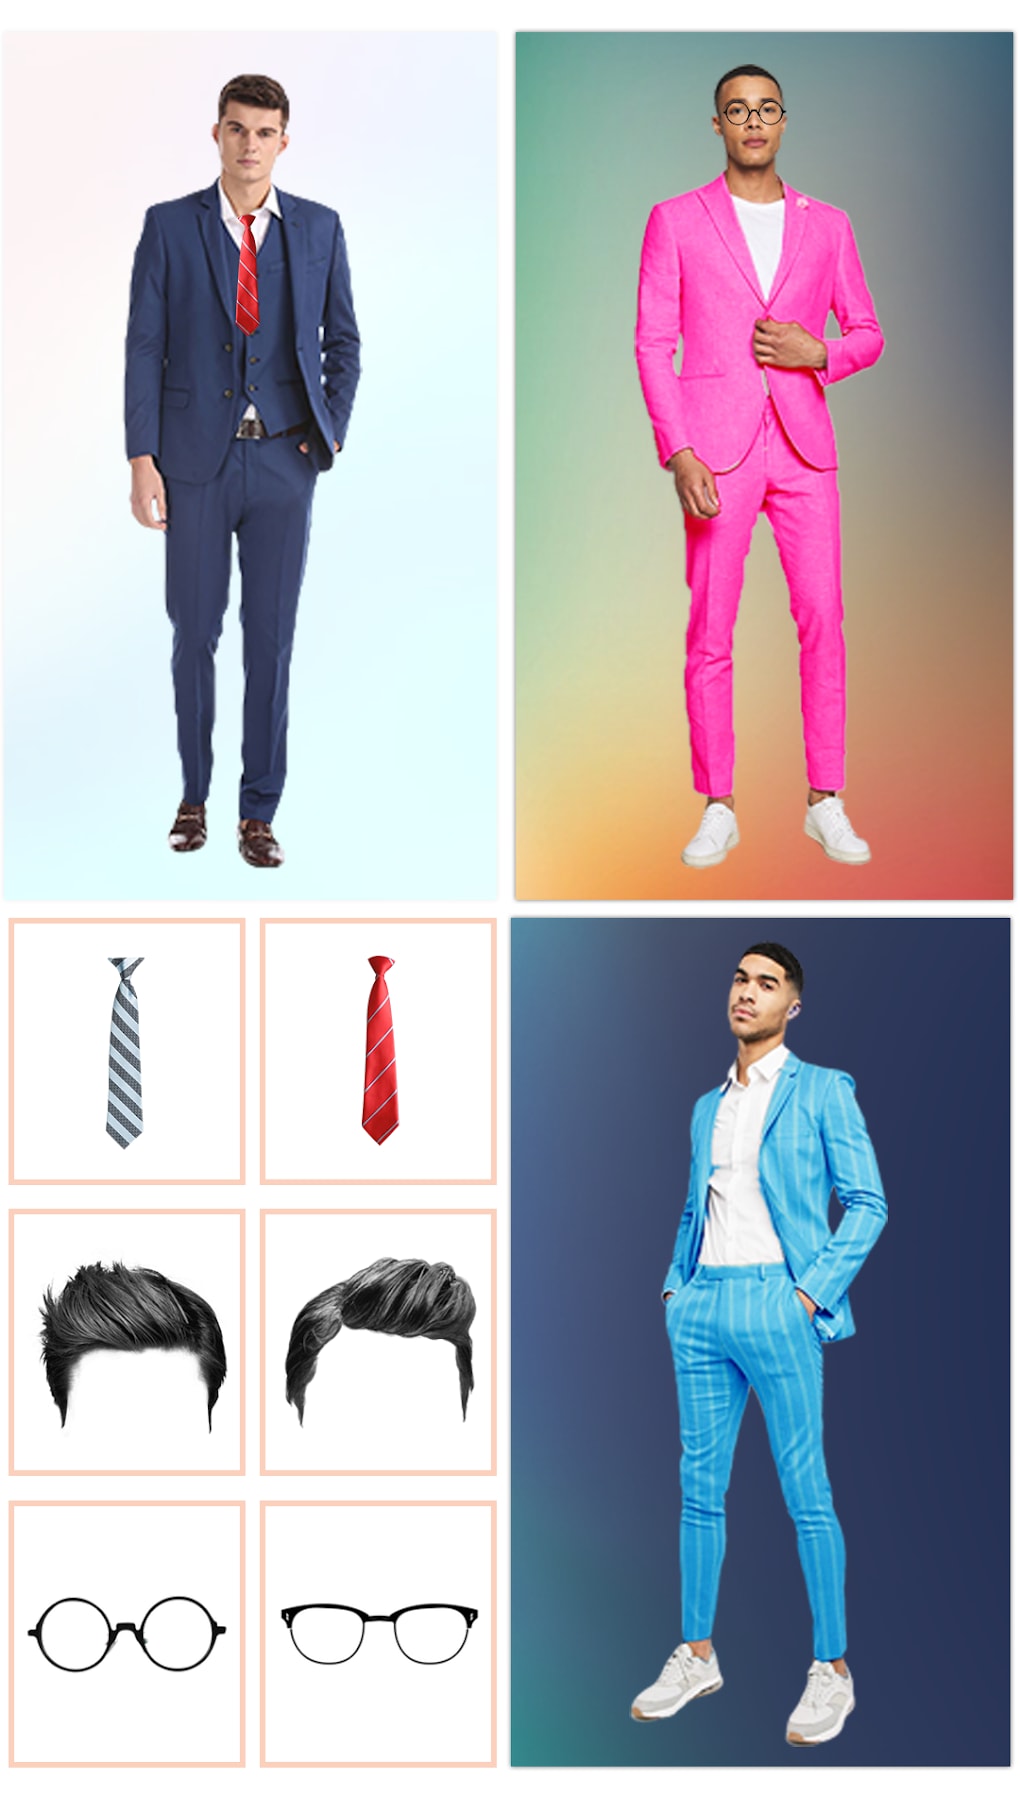 Men & Women Fashion - Suit Photo Editor:Amazon.in:Appstore for Android